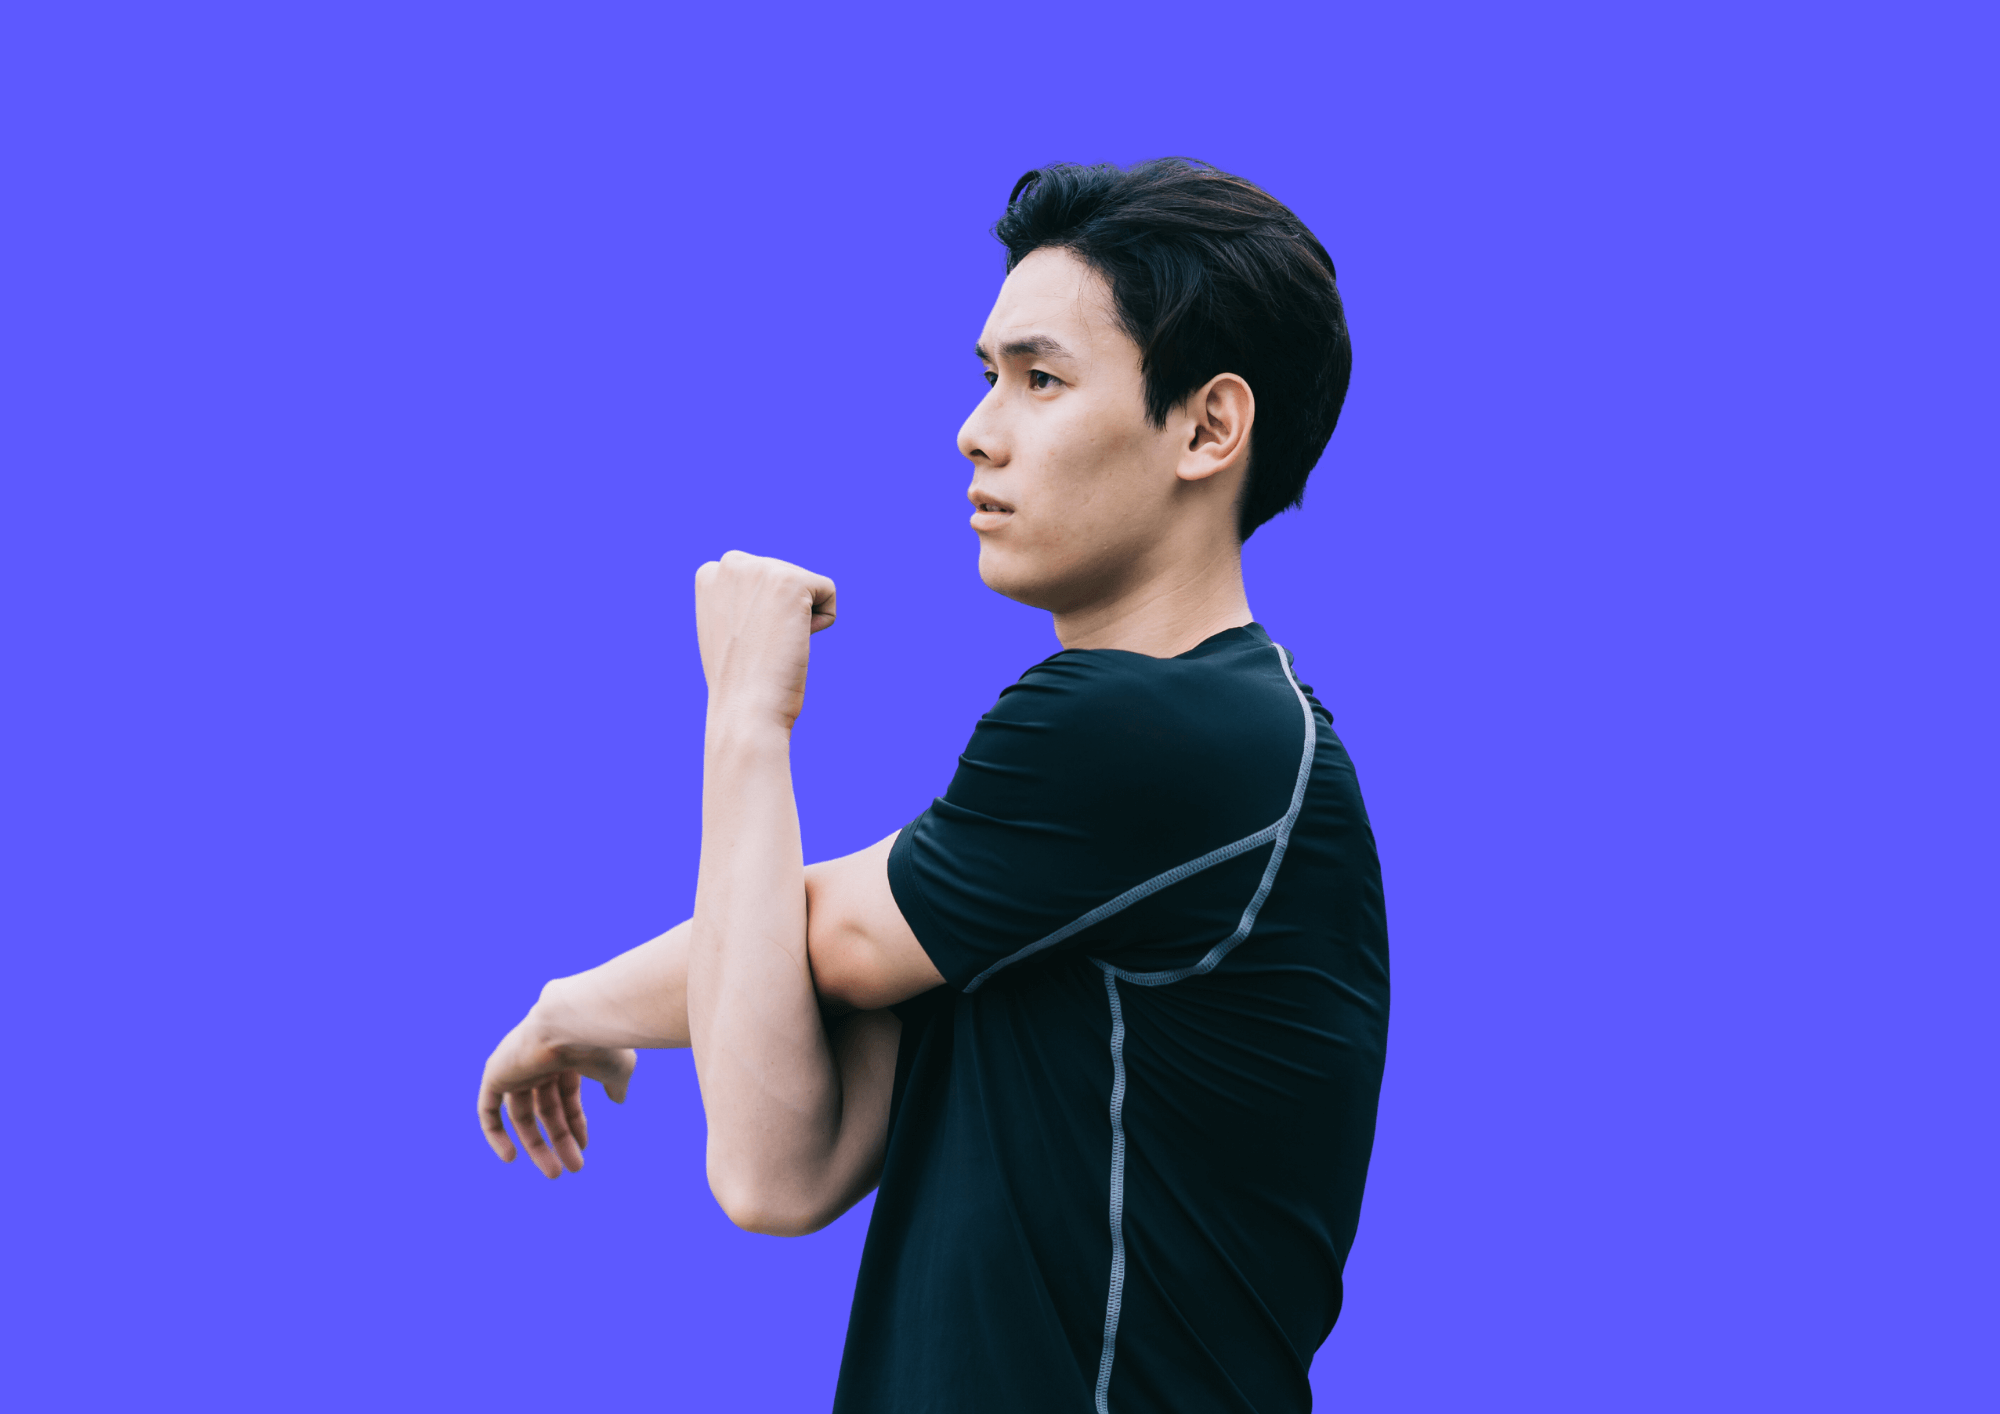 Man in sports shirt is stretching his arm and shoulder. Blue background.